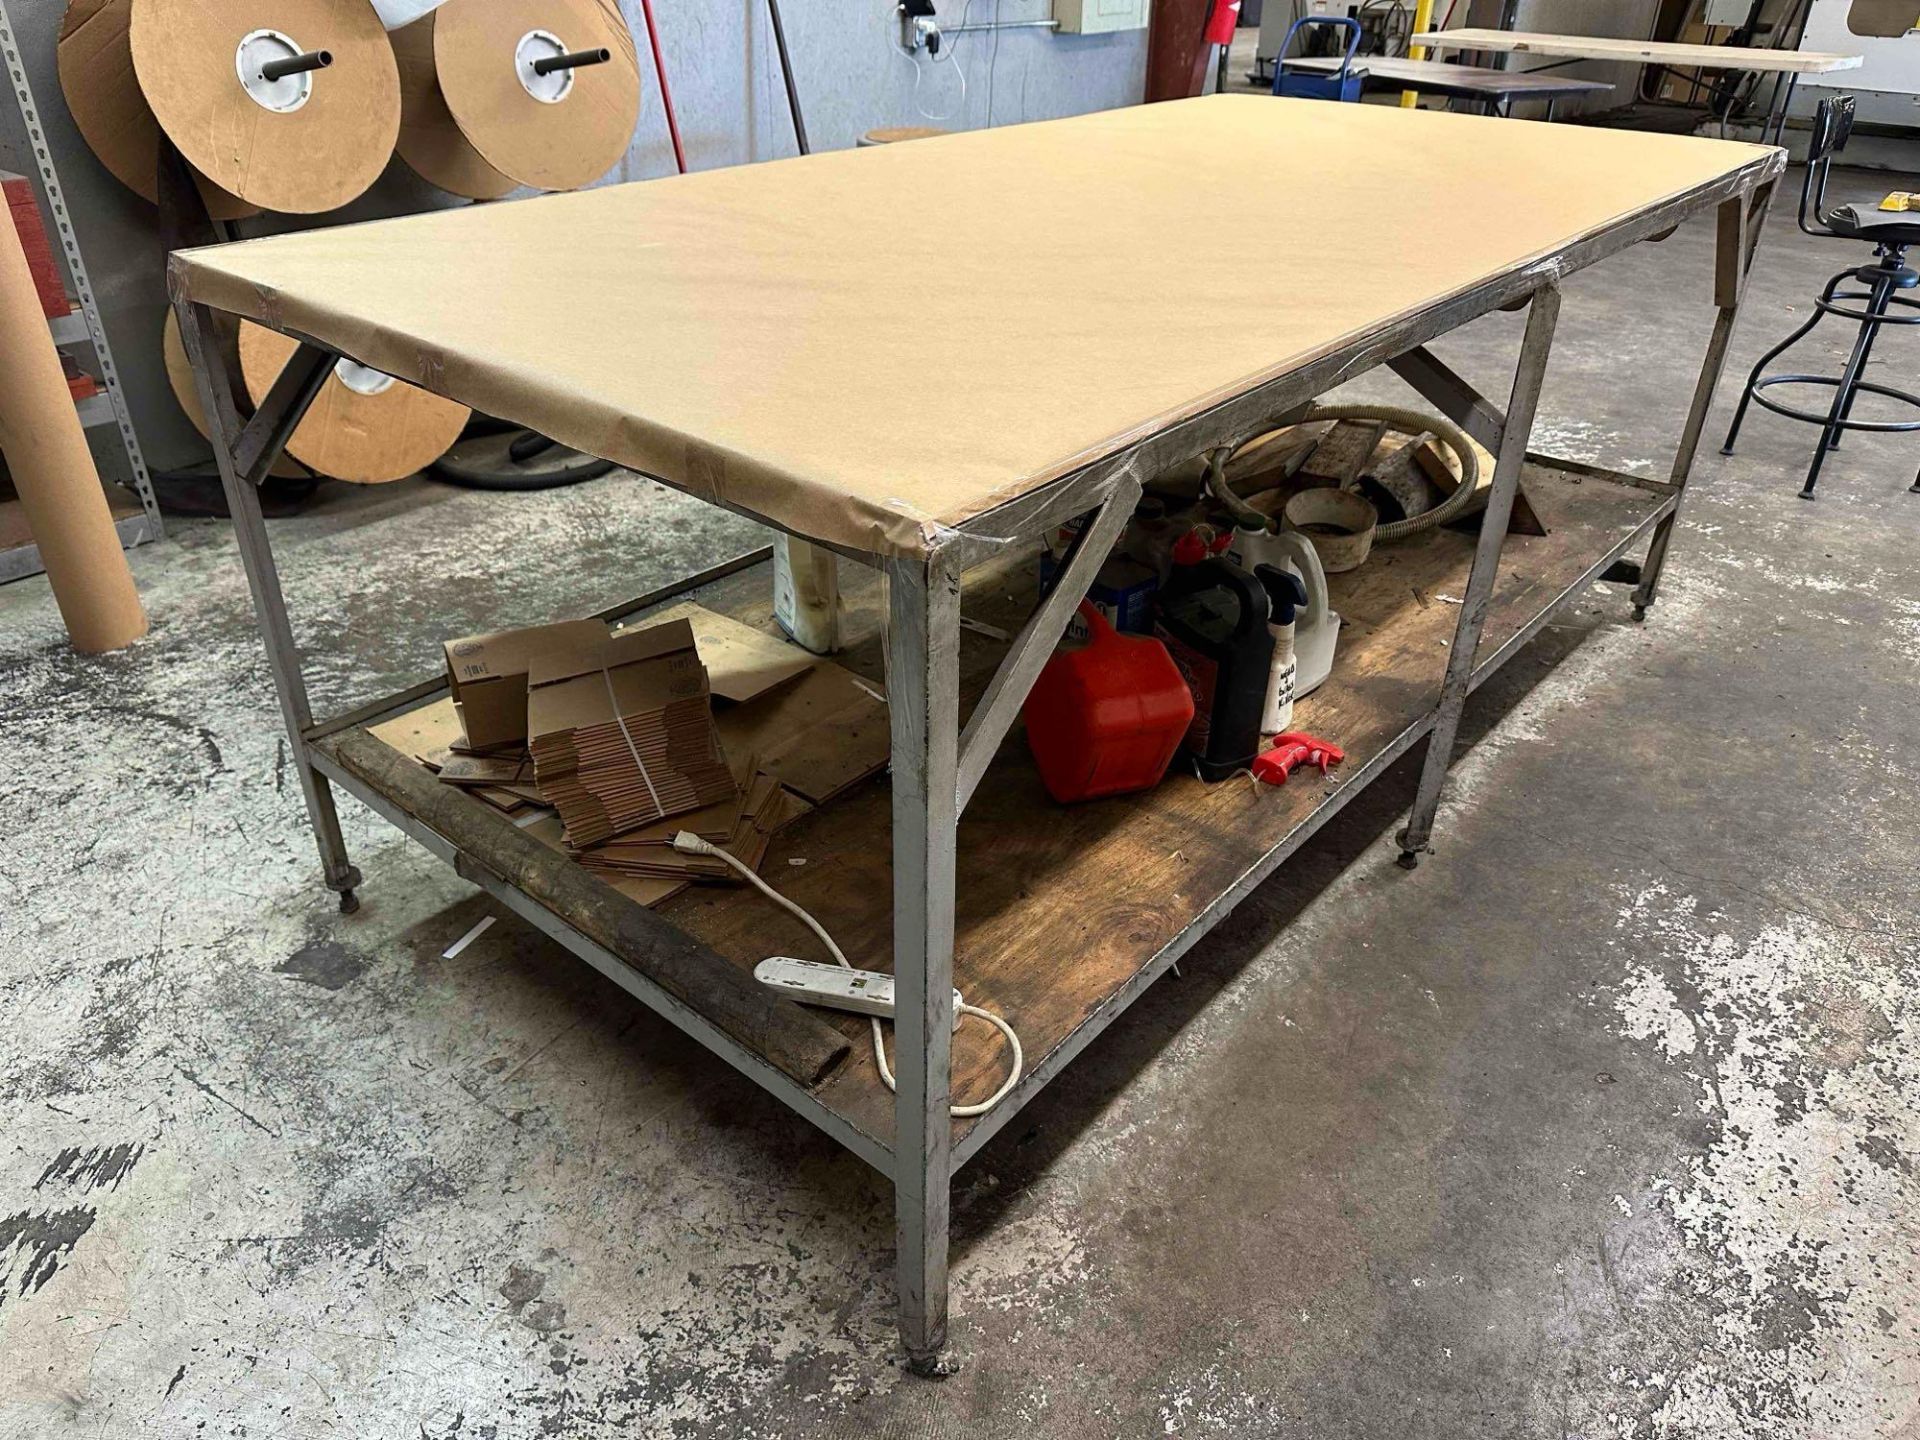 Metal Table with Wooden Top 97” x 49” x 39”. - Image 2 of 3